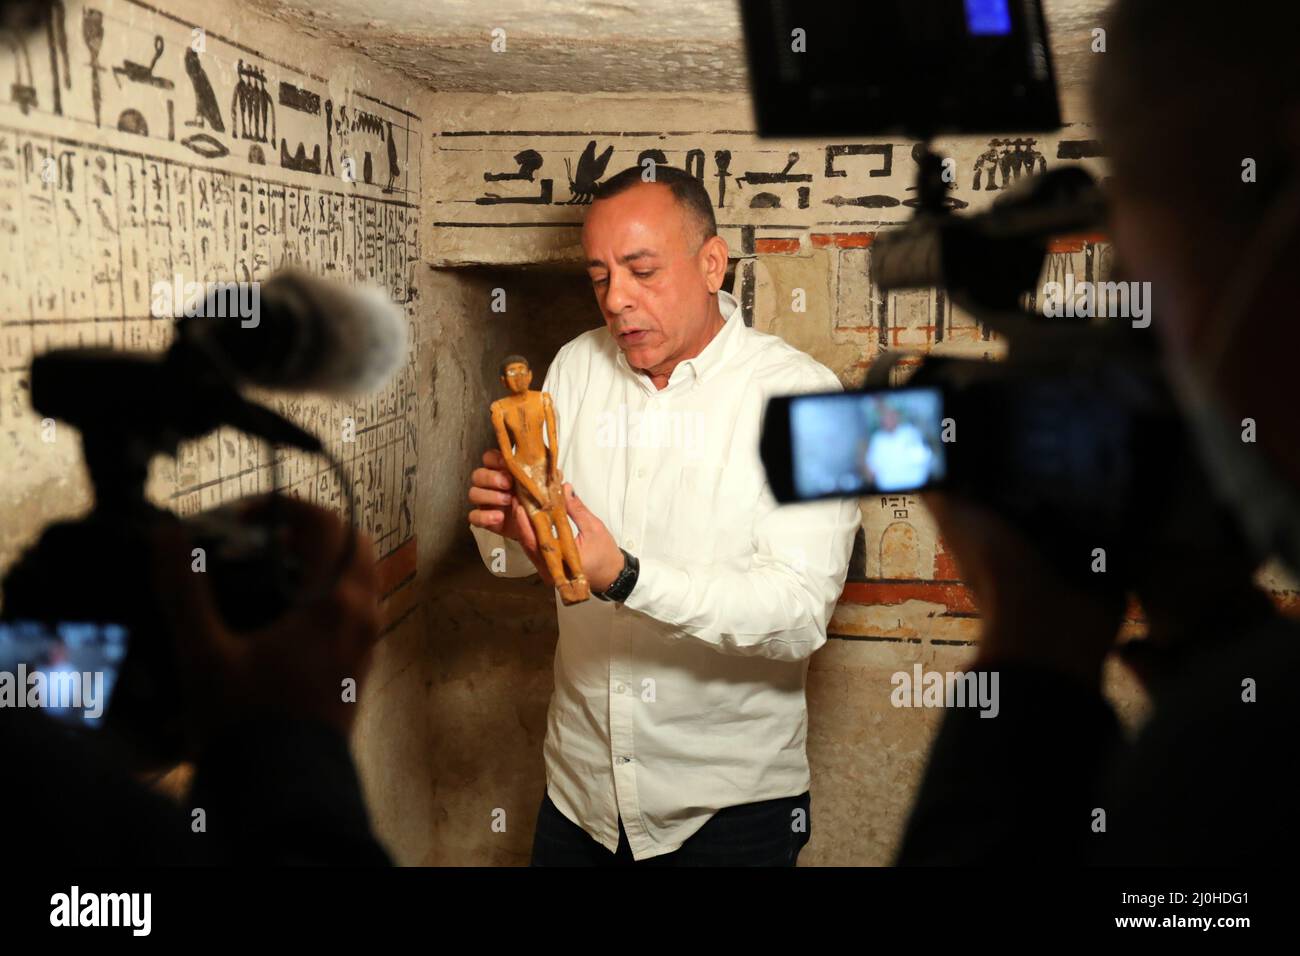 (220319) -- CAIRO, March 19, 2022 (Xinhua) -- An archaeologist shows a statue found in an ancient tomb uncovered at Saqqara archaeological sites southwest of Cairo, Egypt, on March 19, 2022. The Egyptian Ministry of Tourism and Antiquities announced on Thursday the discovery of five 4,000-year-old ancient tombs in the Saqqara archaeological sites southwest of Cairo. The tombs contain finds and objects dating back to the end of the Old Kingdom spanning from 2686 BC to 2181 BC and the beginning of the First Intermediate Period spanning from 2181 BC to 2055 BC. TO GO WITH 'Egypt discovers fi Stock Photo